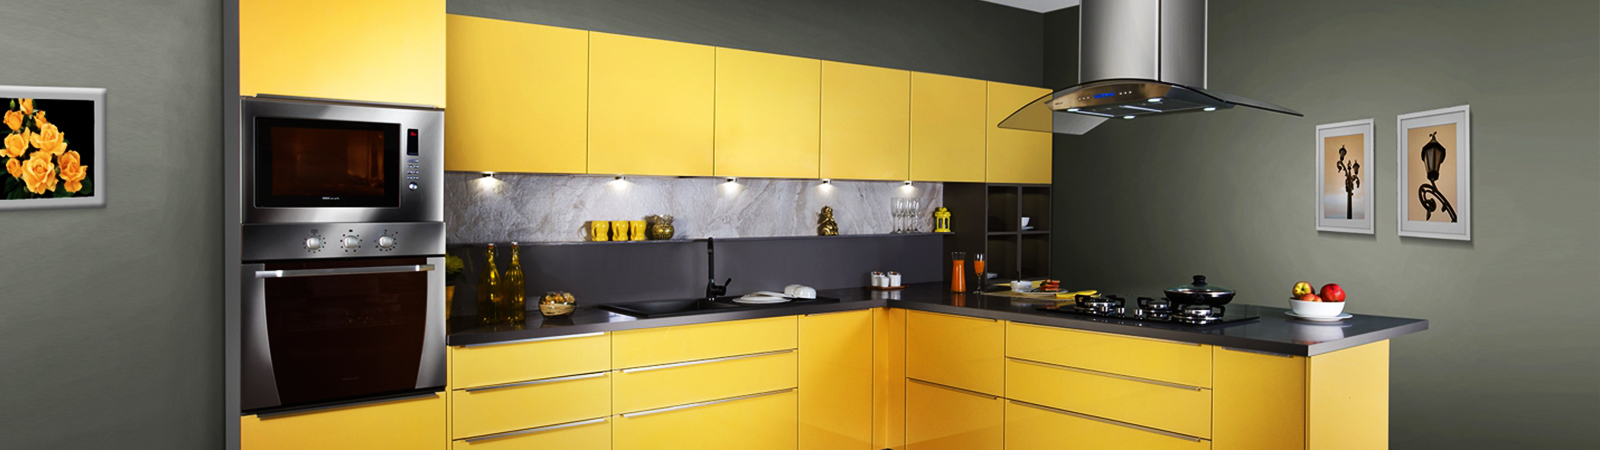 Need Best Modular Kitchen Manufacturers in Kolkata? Here's Your Guide ...